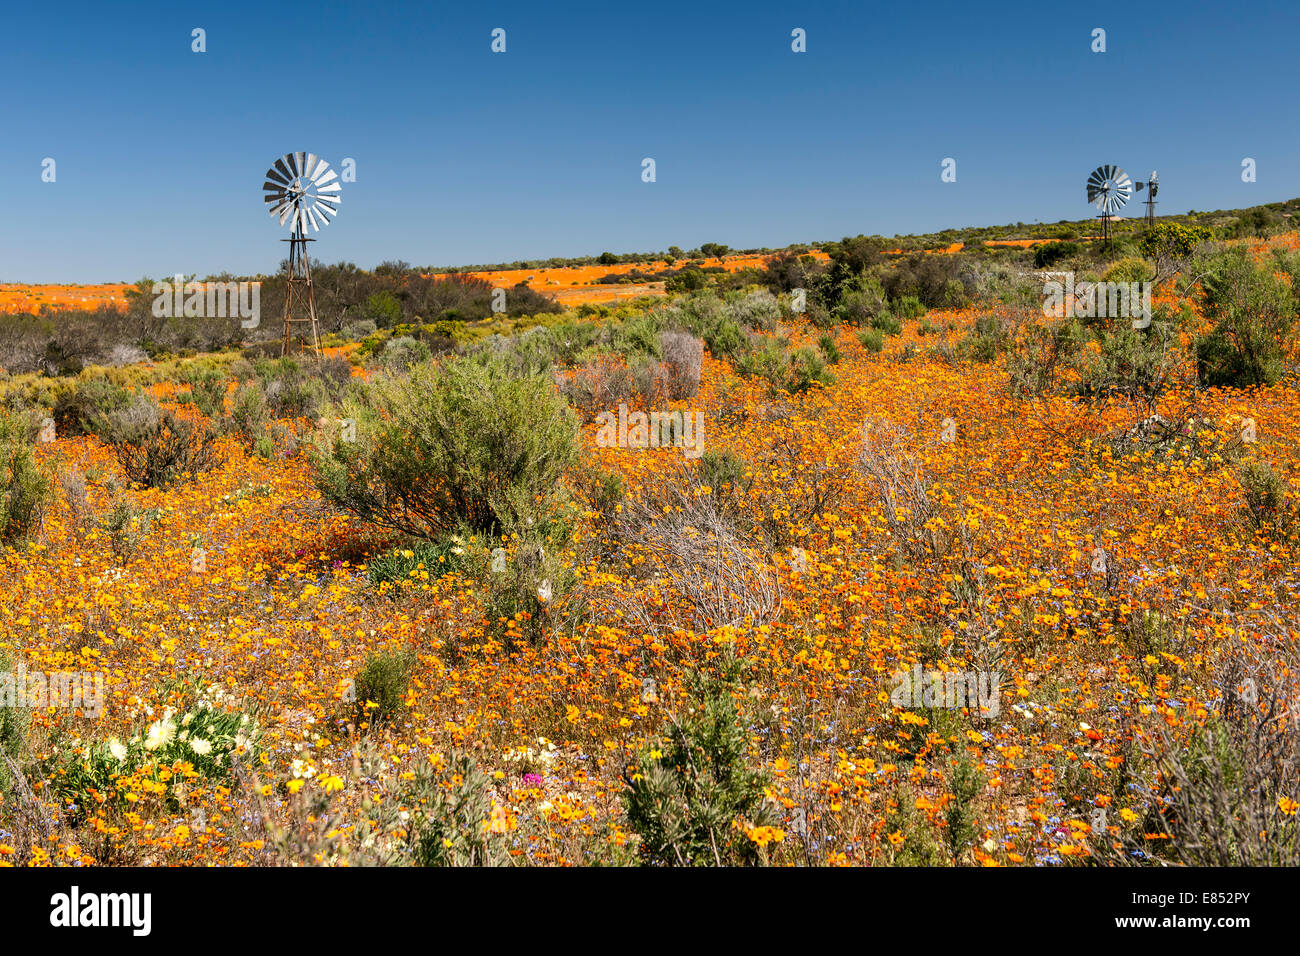 Flowers and windmills in the Namaqua National Park in South Africa. Stock Photo